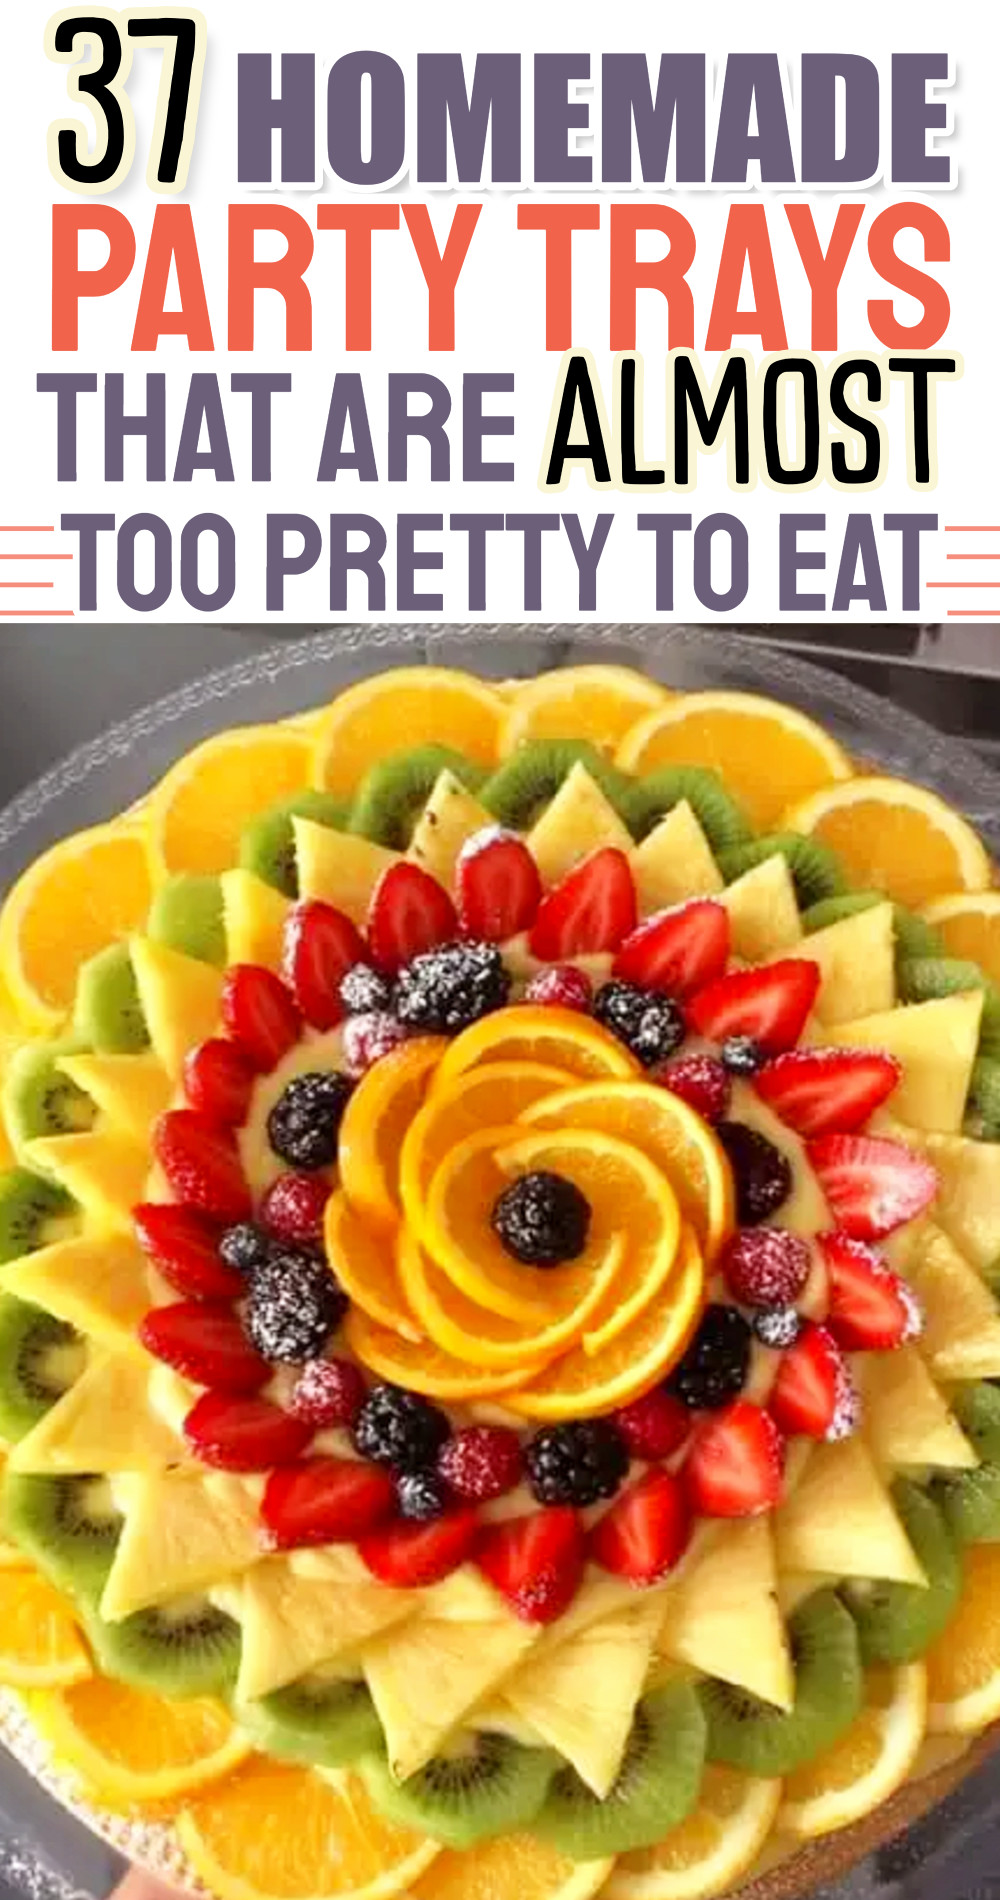 37 homemade party trays that are almost too pretty to eat